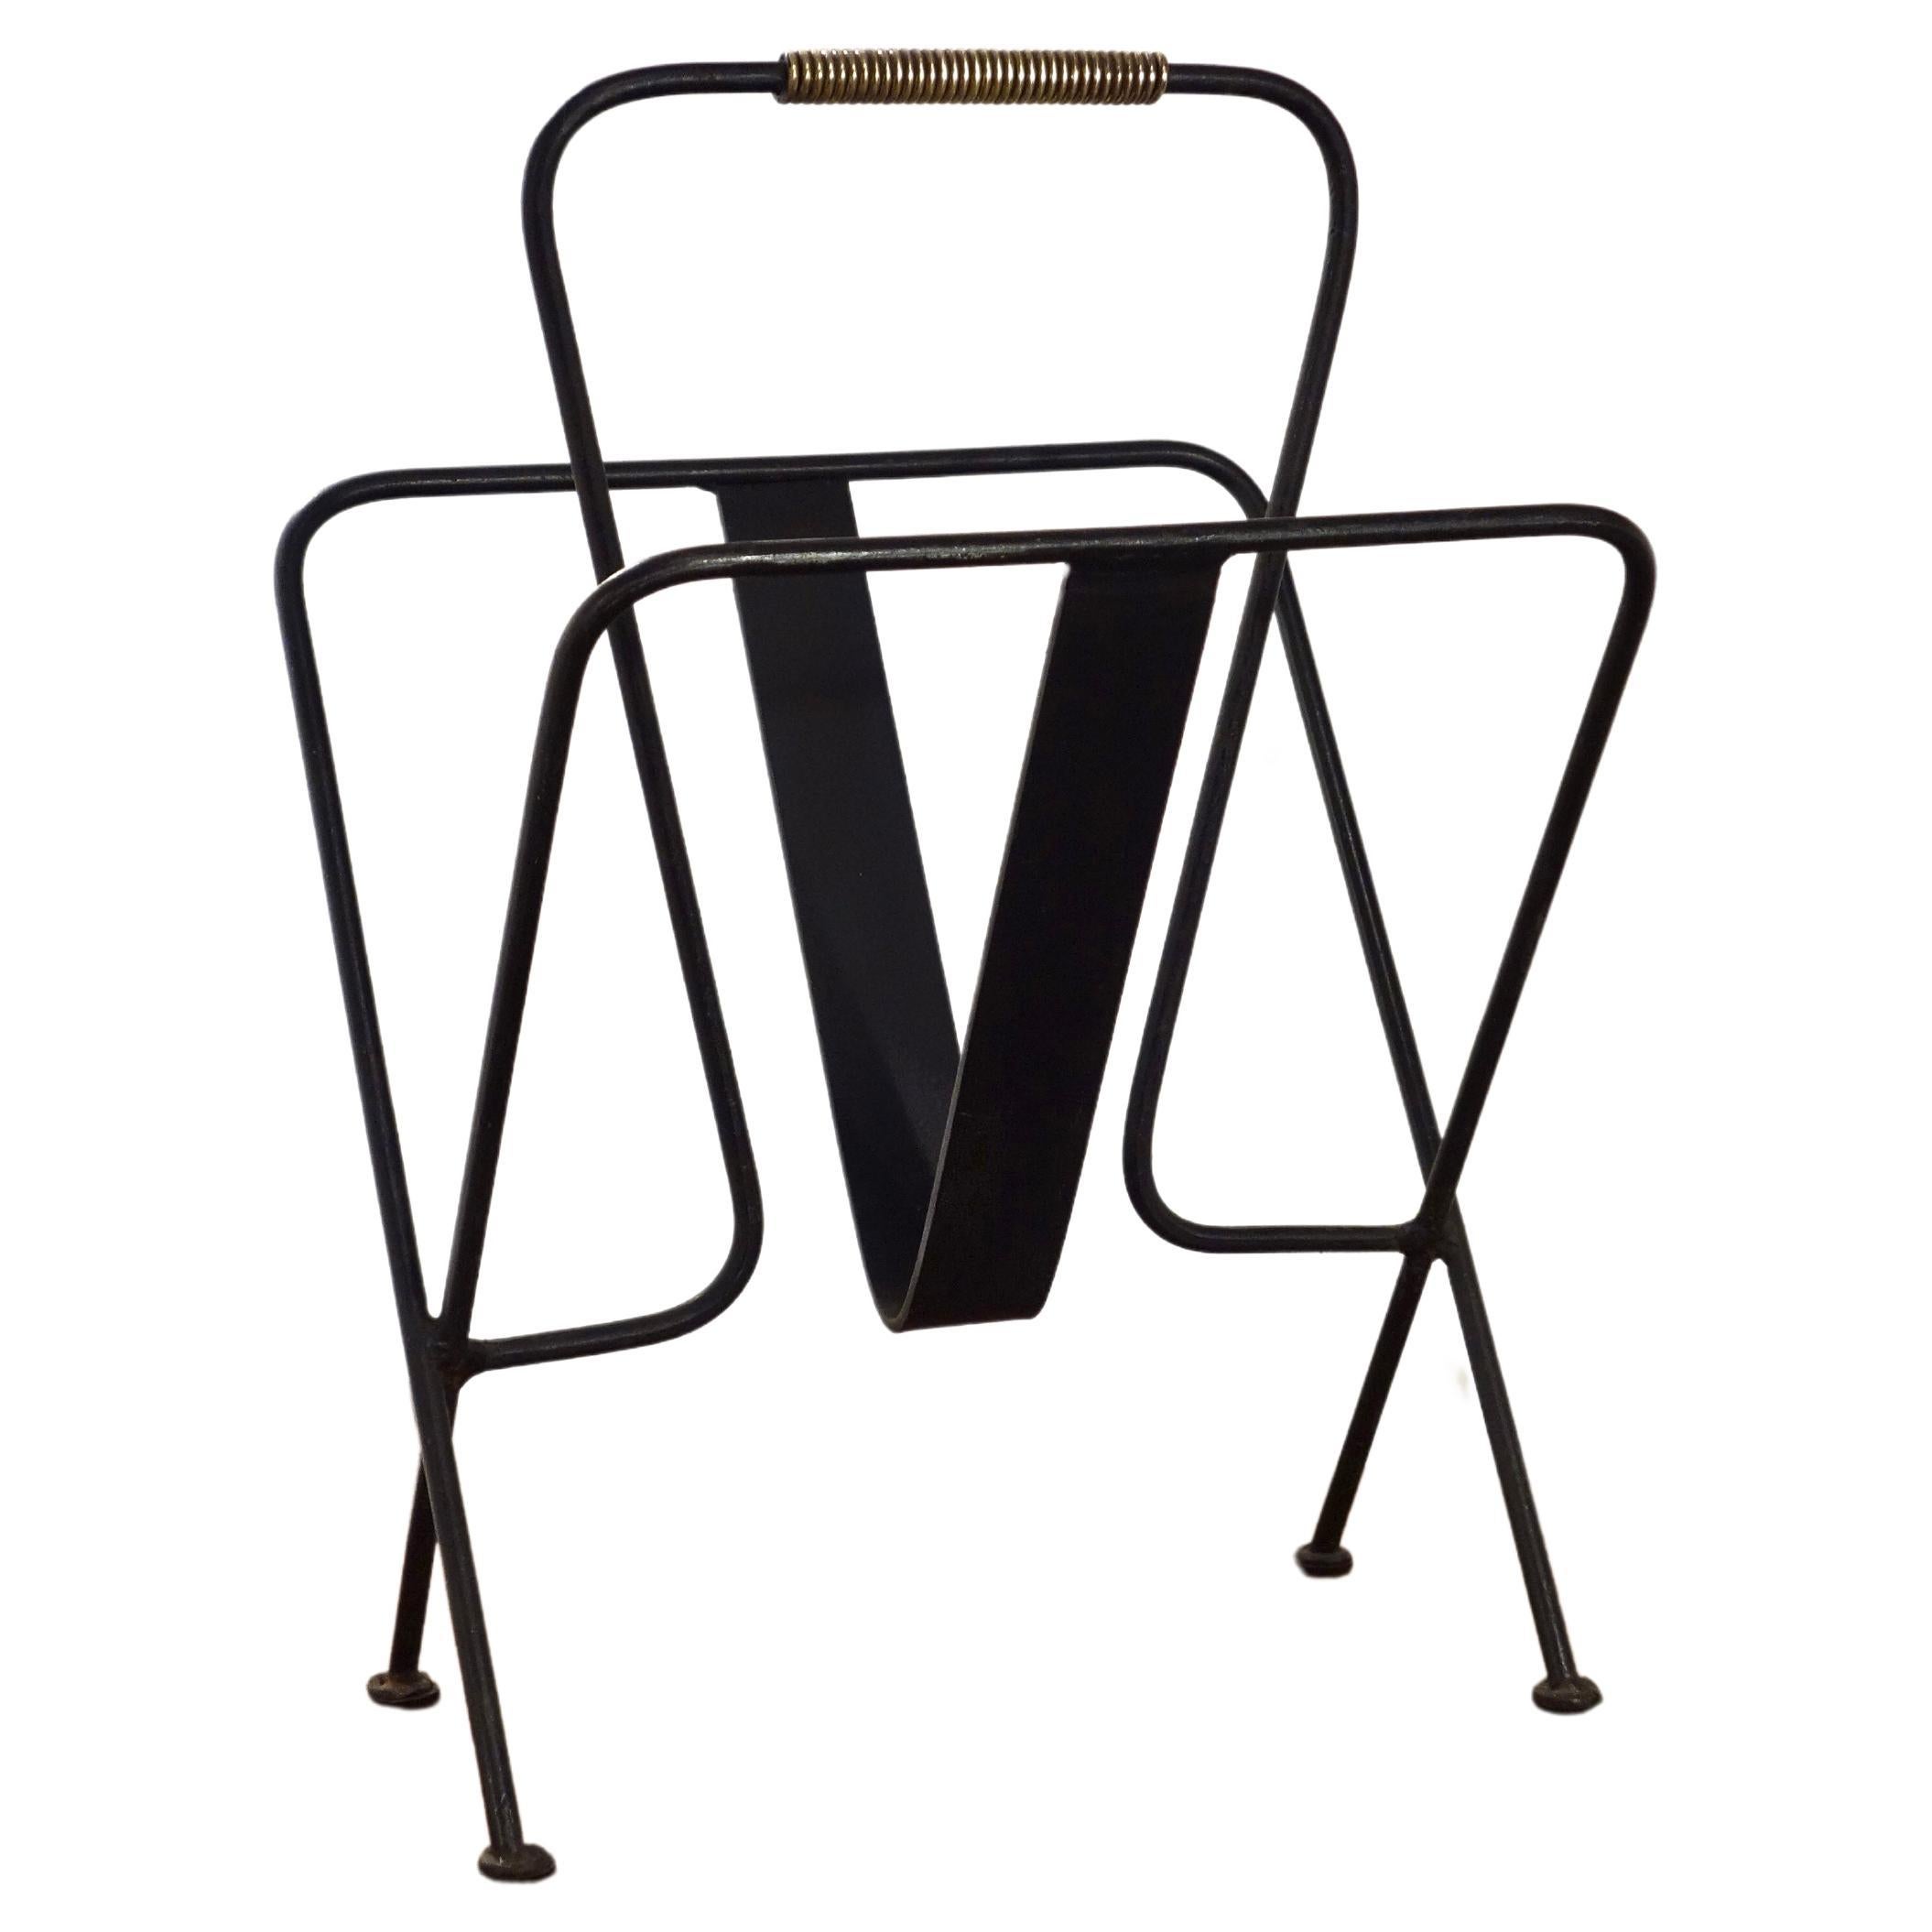 French Magazine rack by Jacques Adnet 1950s